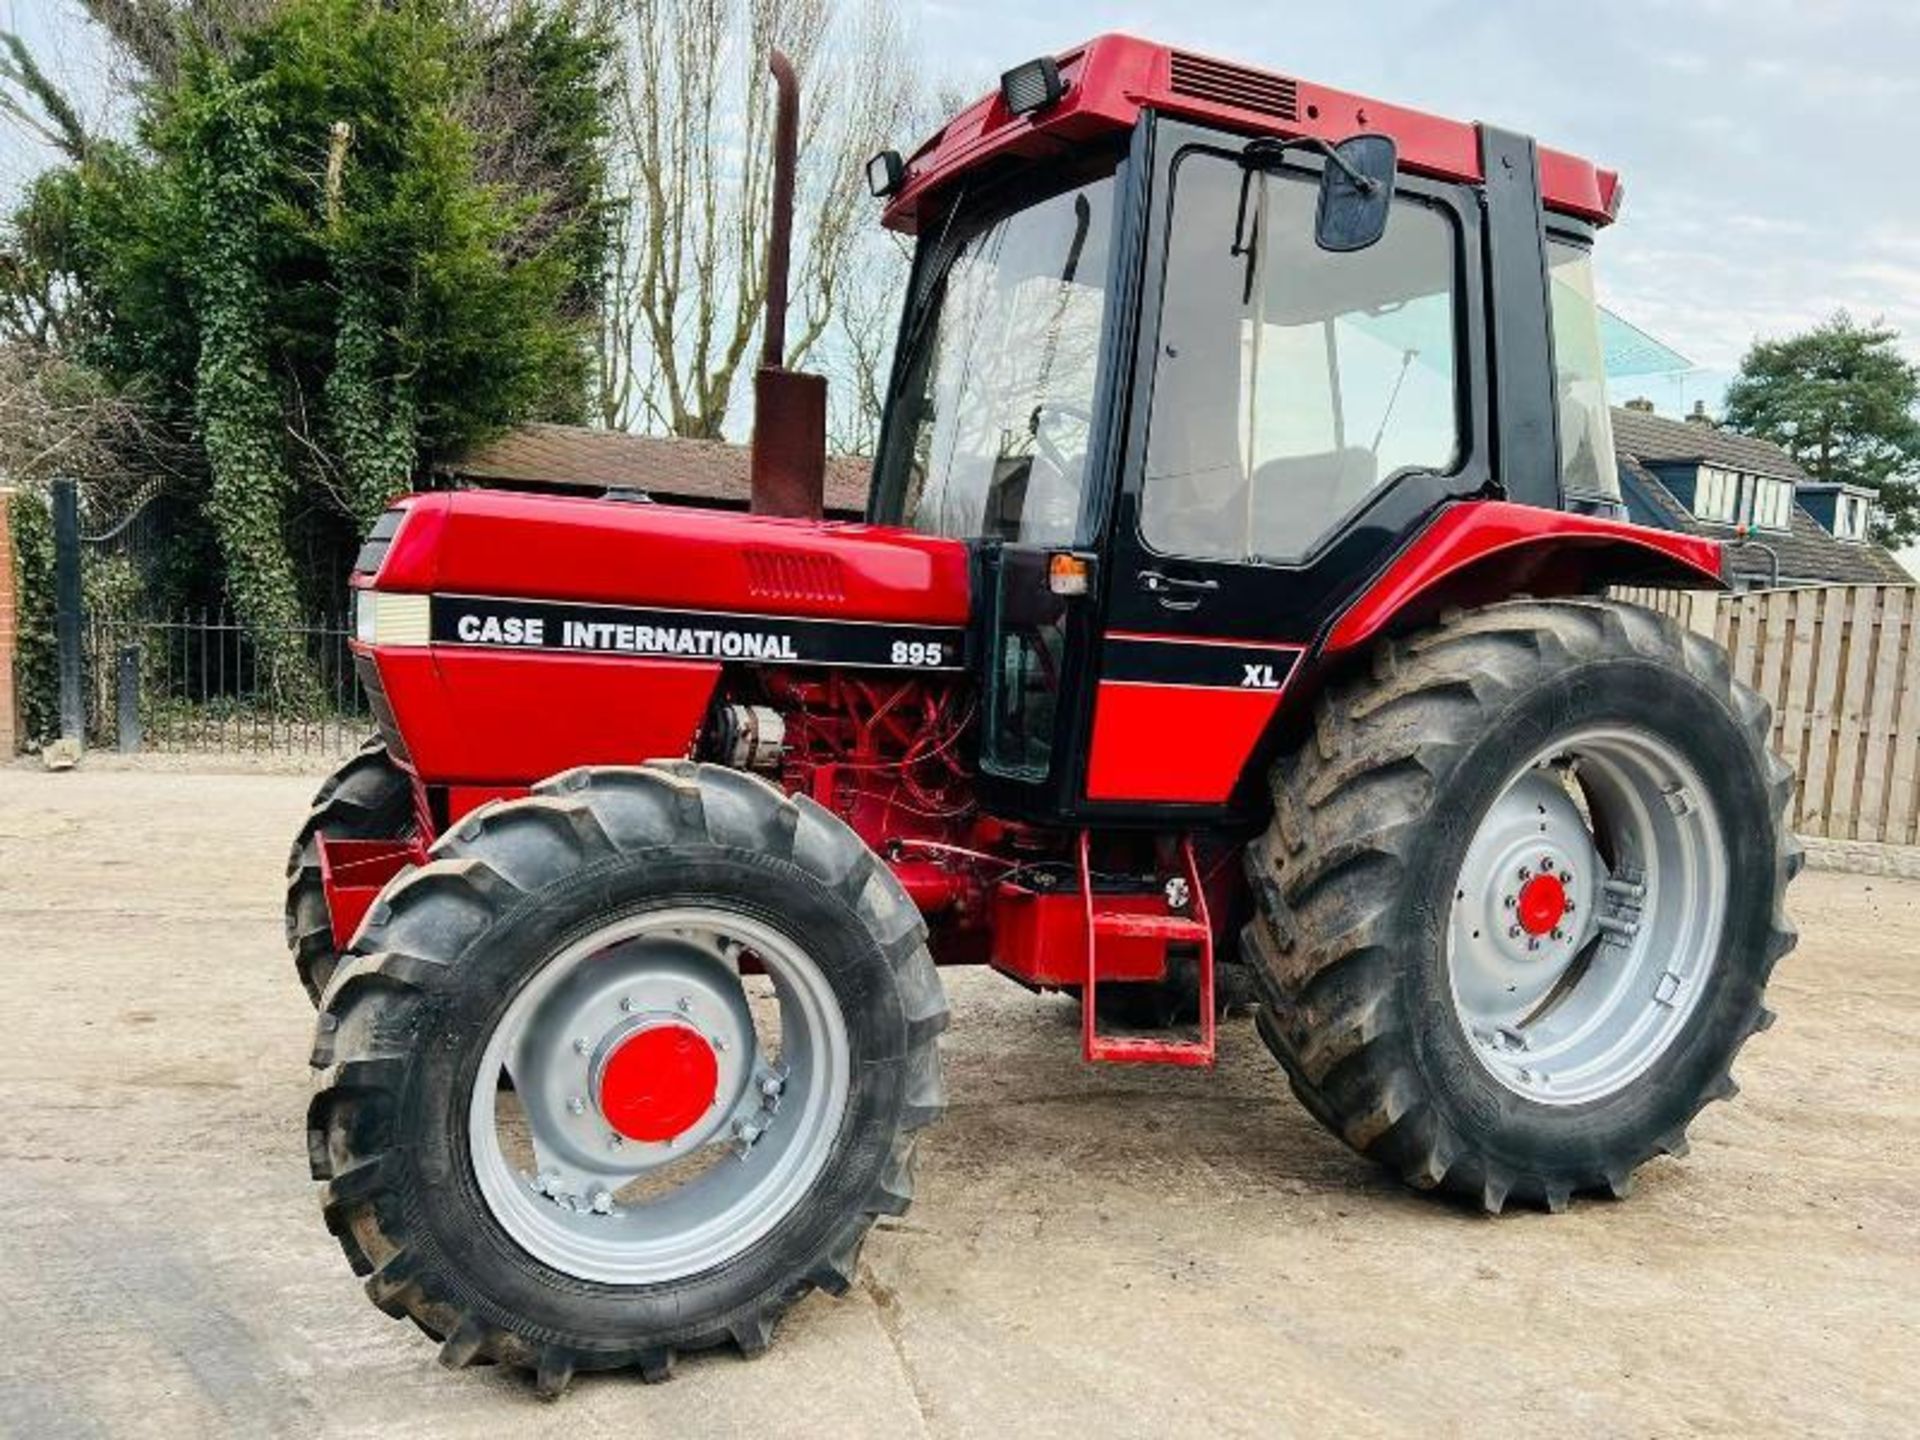 CASE INTERNATIONAL 895 4WD TRACTOR * ONLY 5387 HOURS